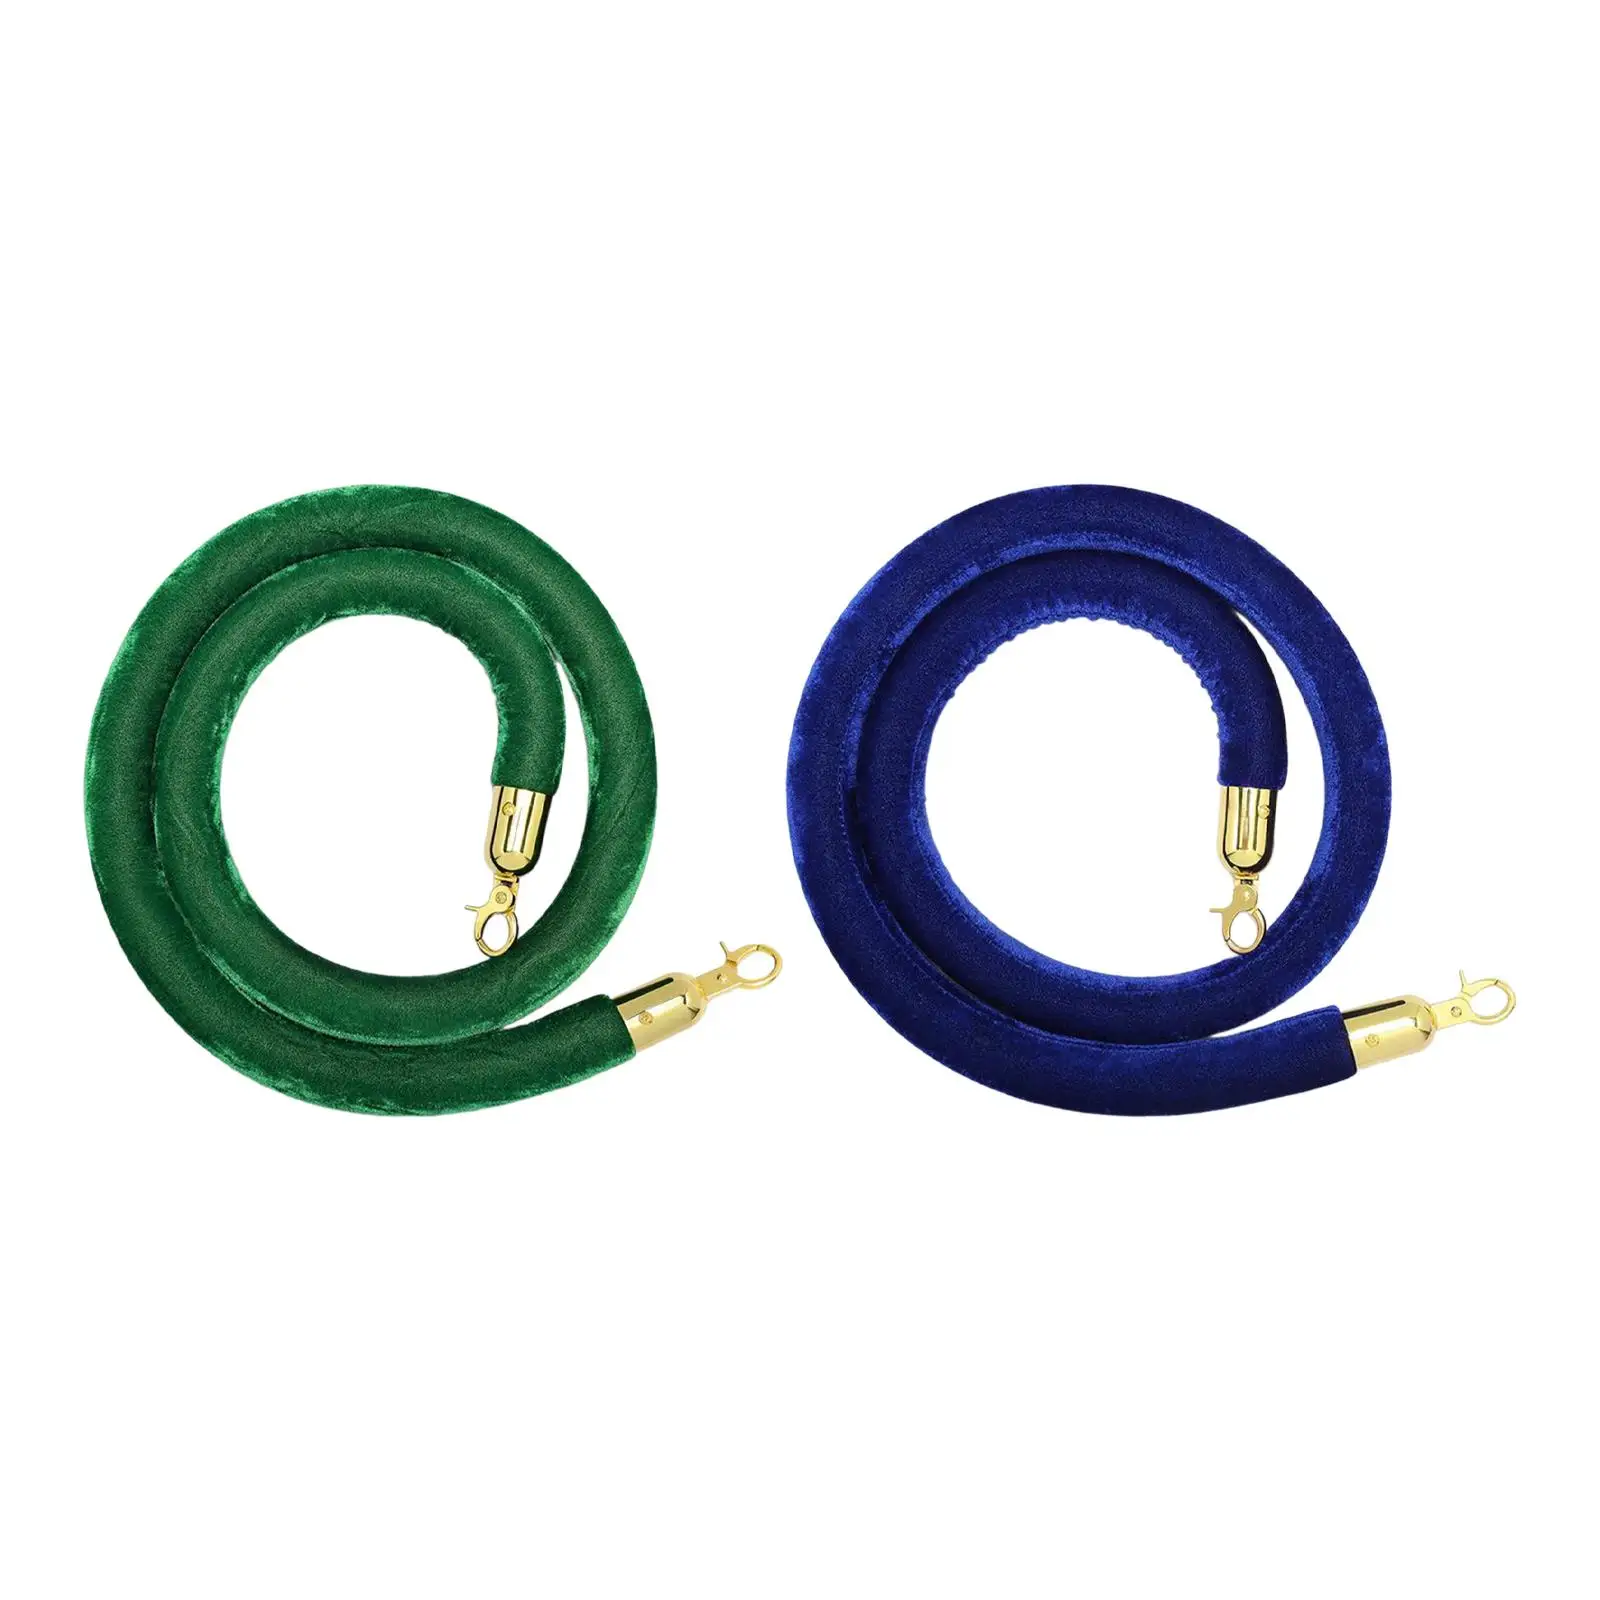 150cm Velvet Stanchion Rope with Snap Hooks Multifunctional Post Rope Accessory for Upscale Events Stylish